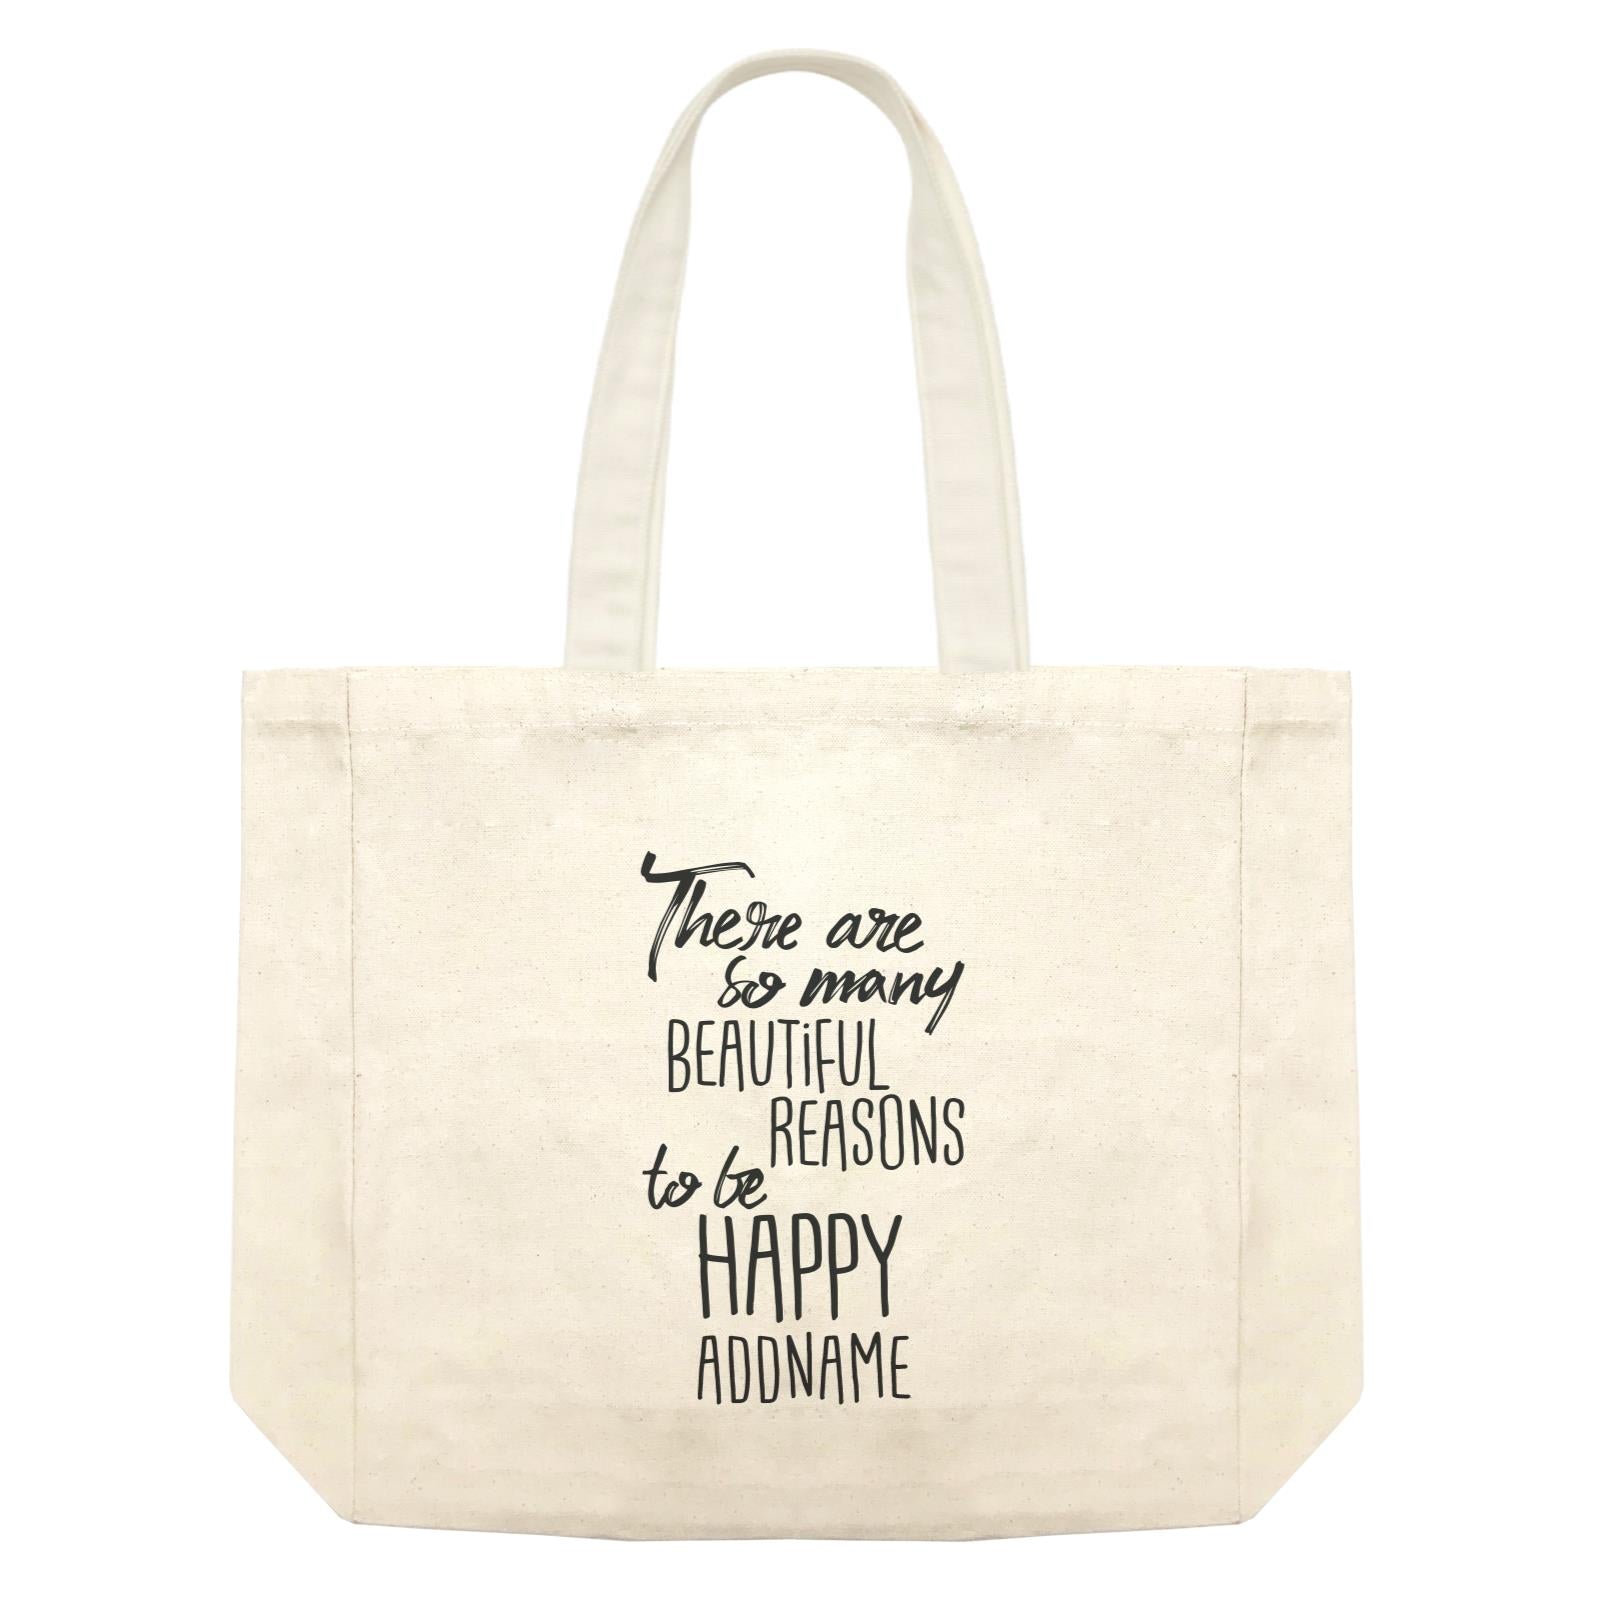 Inspiration Quotes There Are So Many Beautiful Reasons To Be Happy Addname Shopping Bag